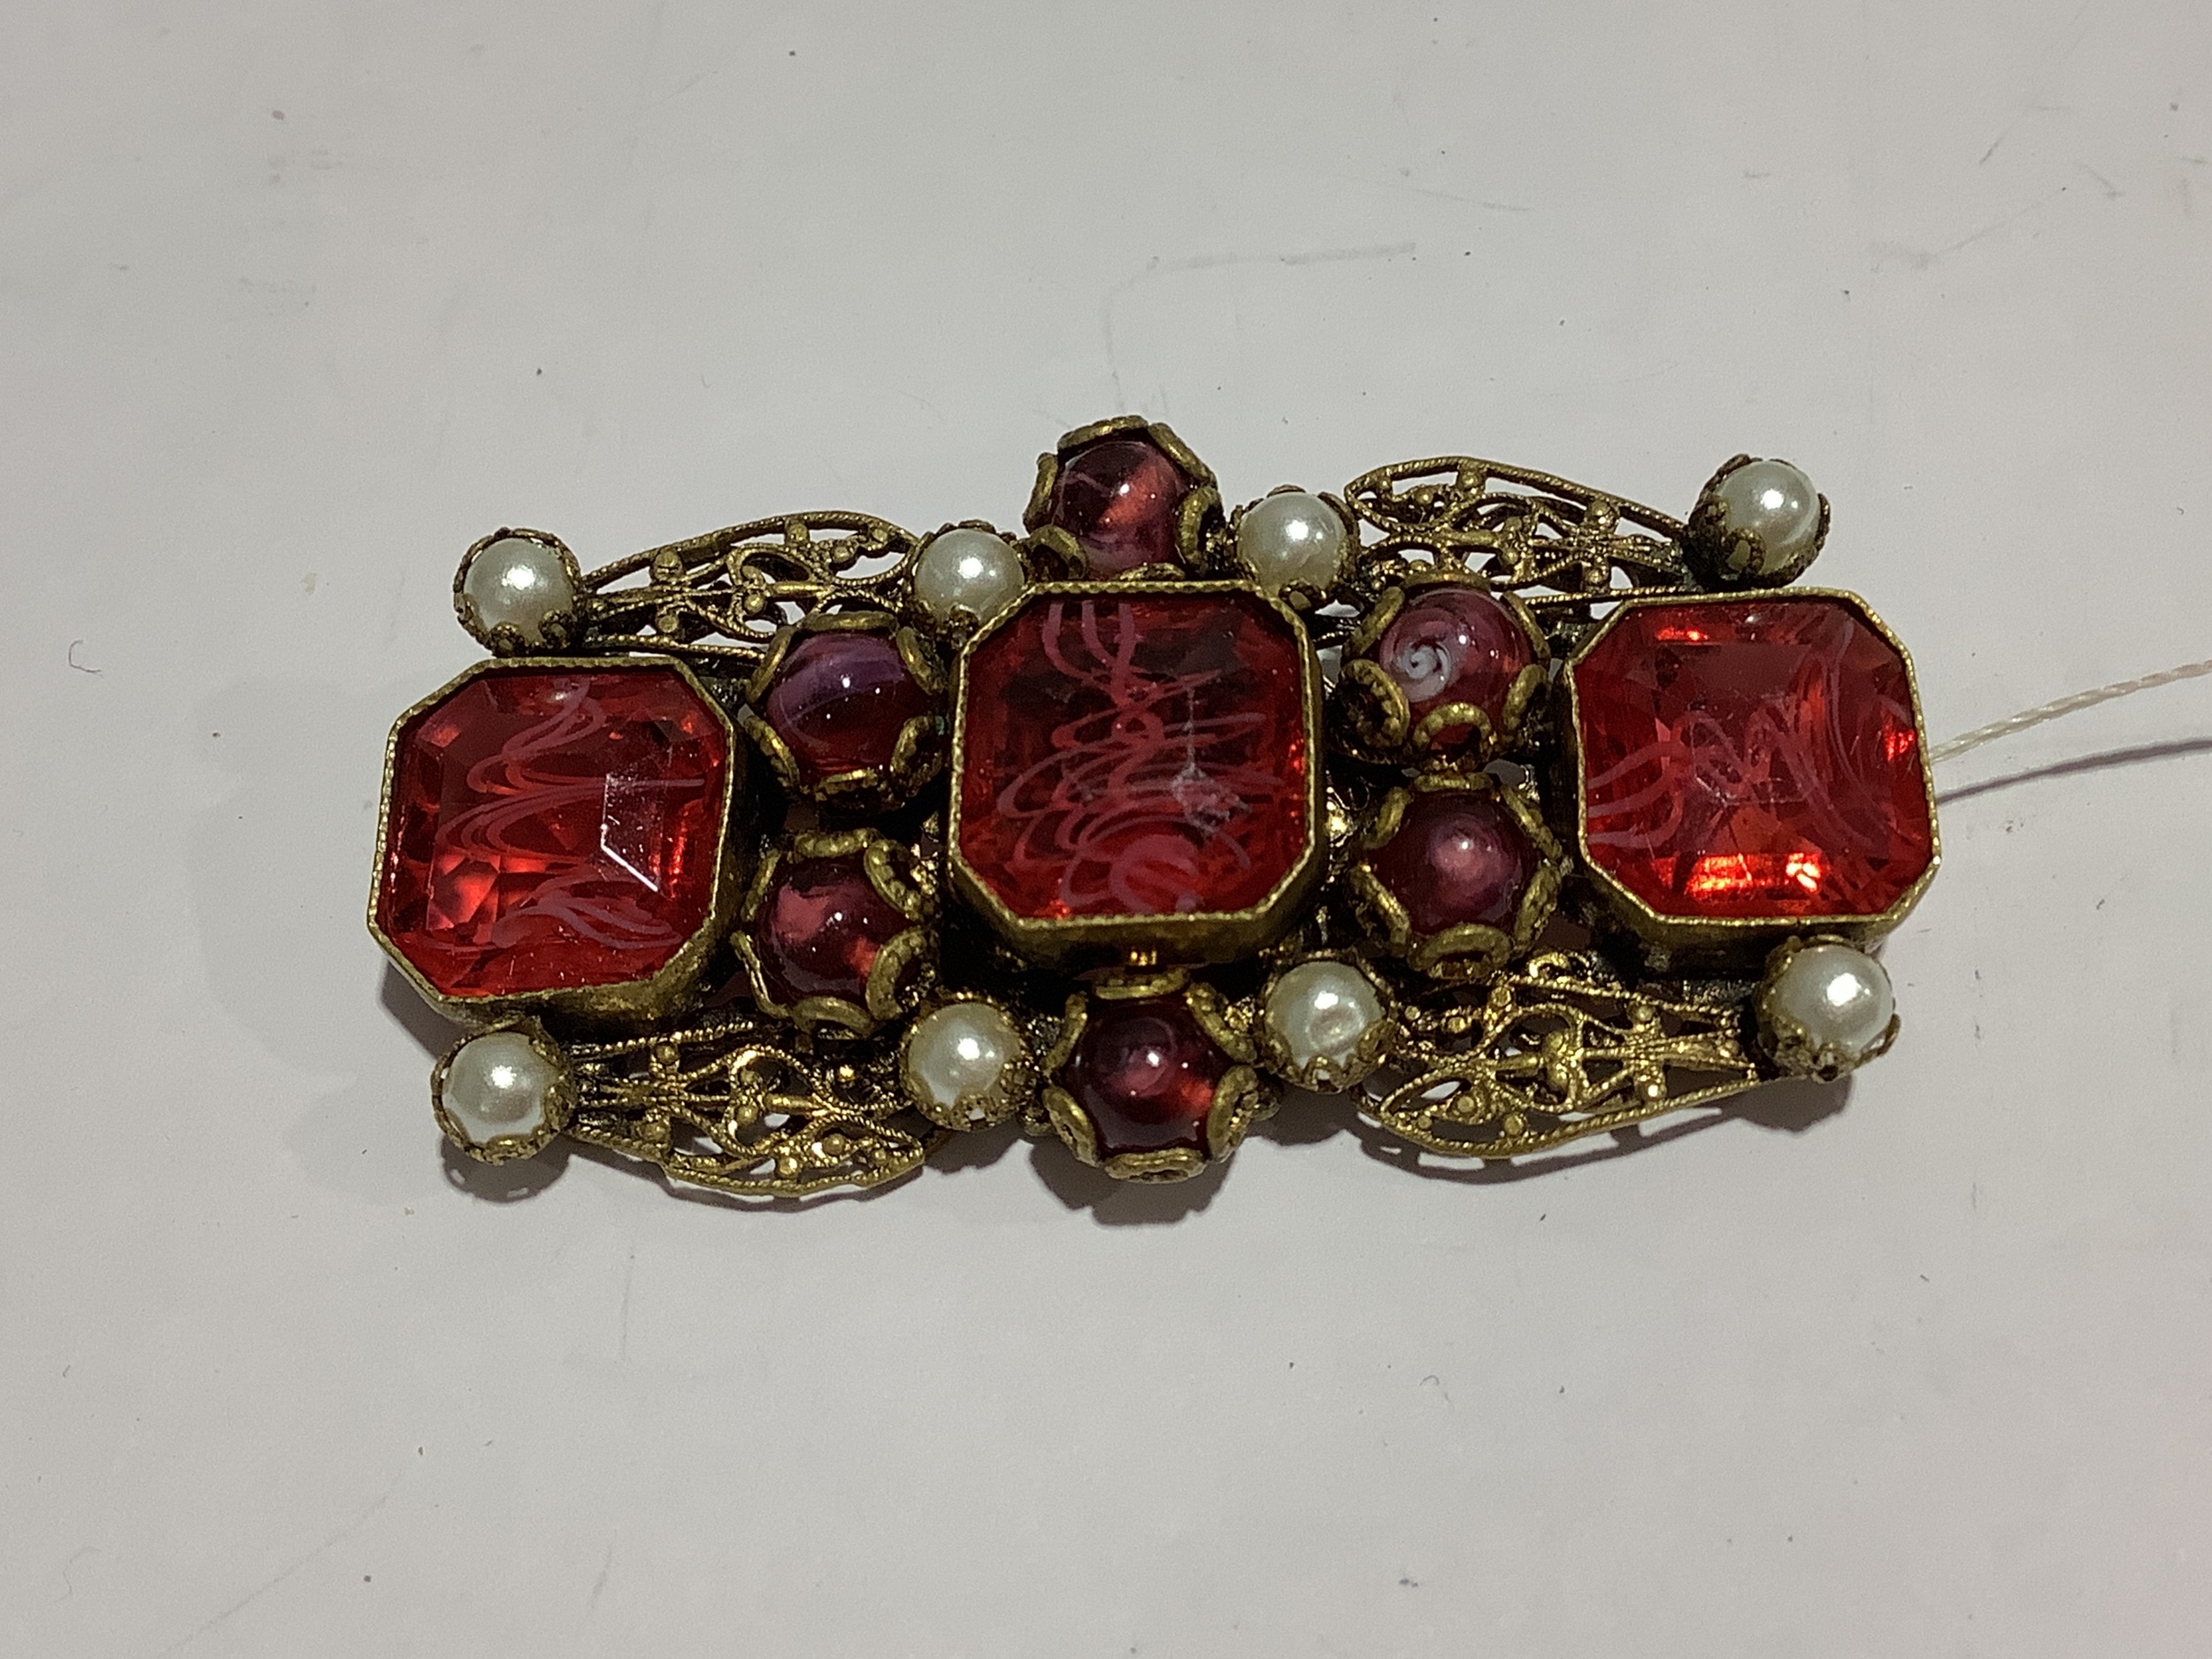 Vintage costume jewellery in the antique style, brooches, bracelet with seals, earrings. - Image 11 of 16